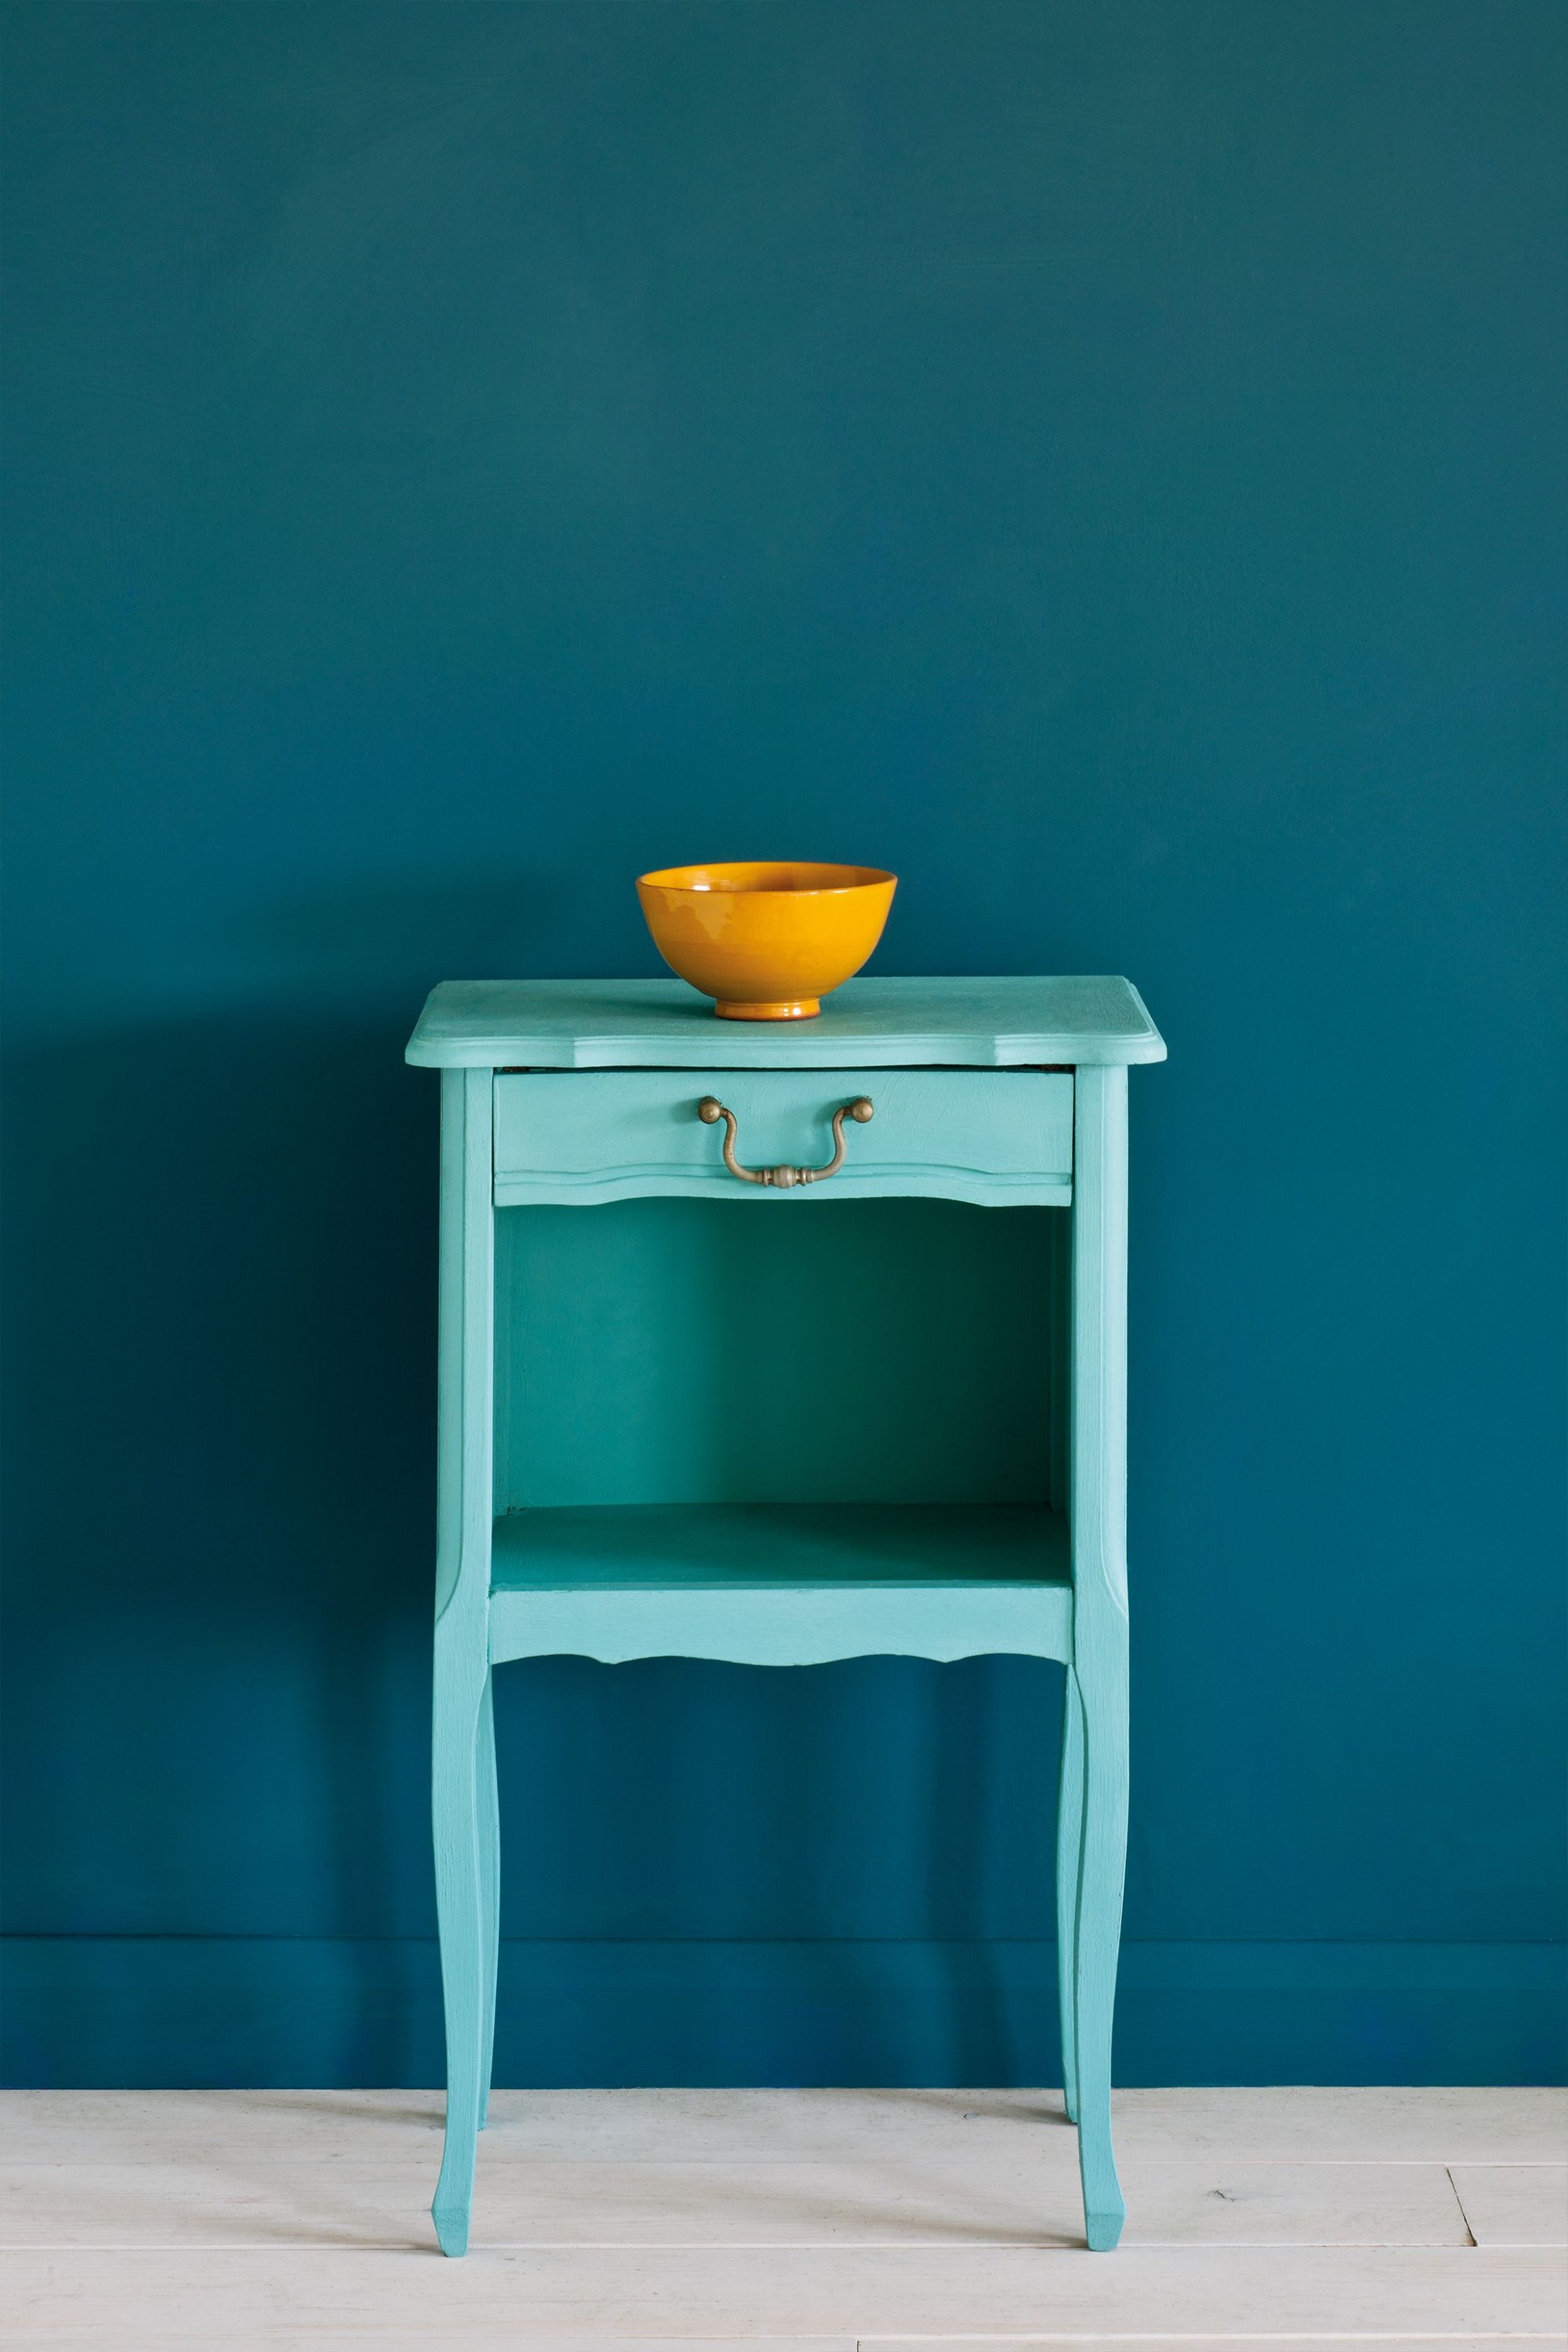 Provence | Provence Chalk Paint, Annie Sloan Painted Furniture ..